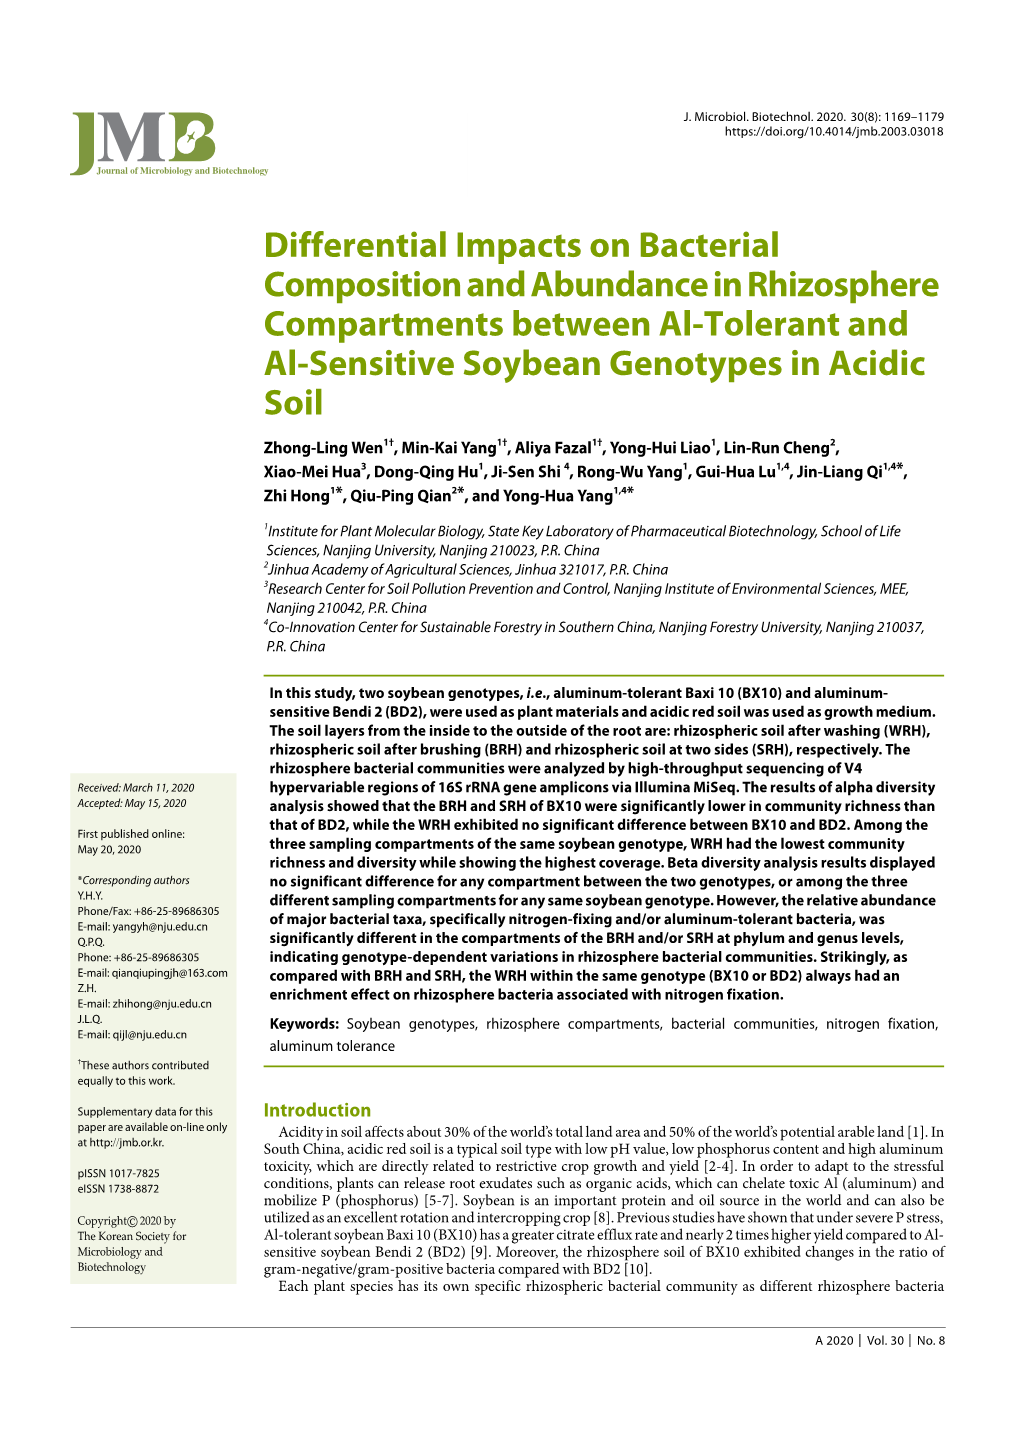 Differential Impacts on Bacterial Composition and Abundance in Rhizosphere Compartments Between Al-Tolerant and Al-Sensitive Soybean Genotypes in Acidic Soil